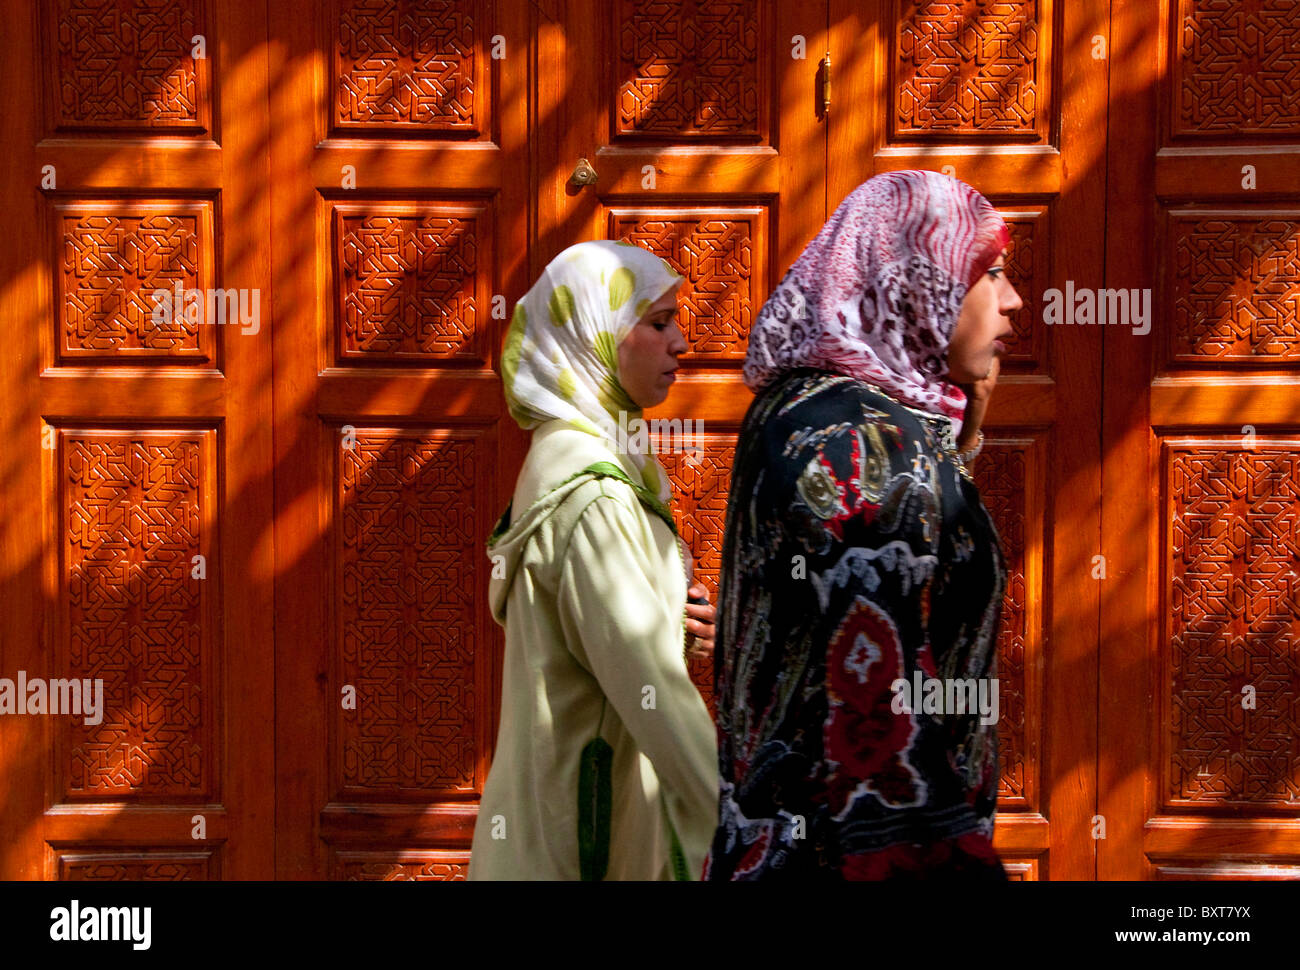 Muslim women passing carved door in old medina of Fes, Morocco Stock Photo